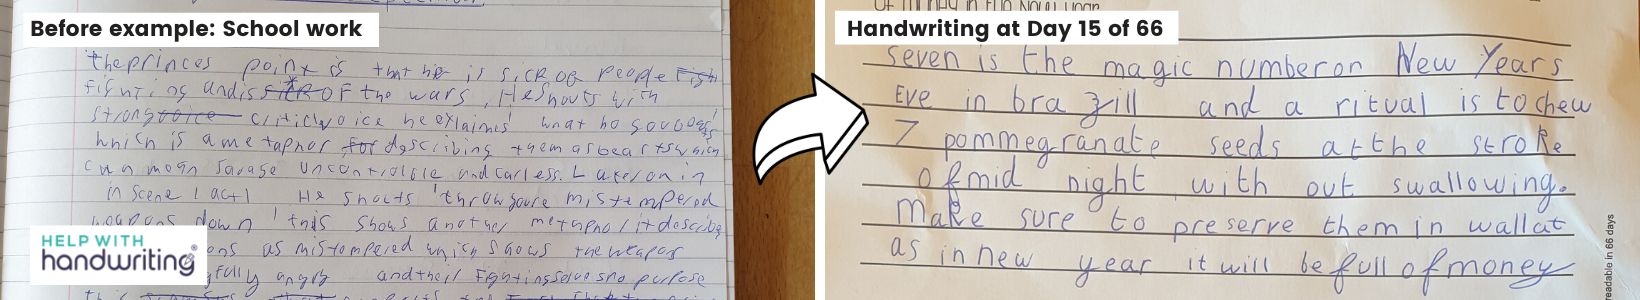 before and after image 1 teenage handwriting changes